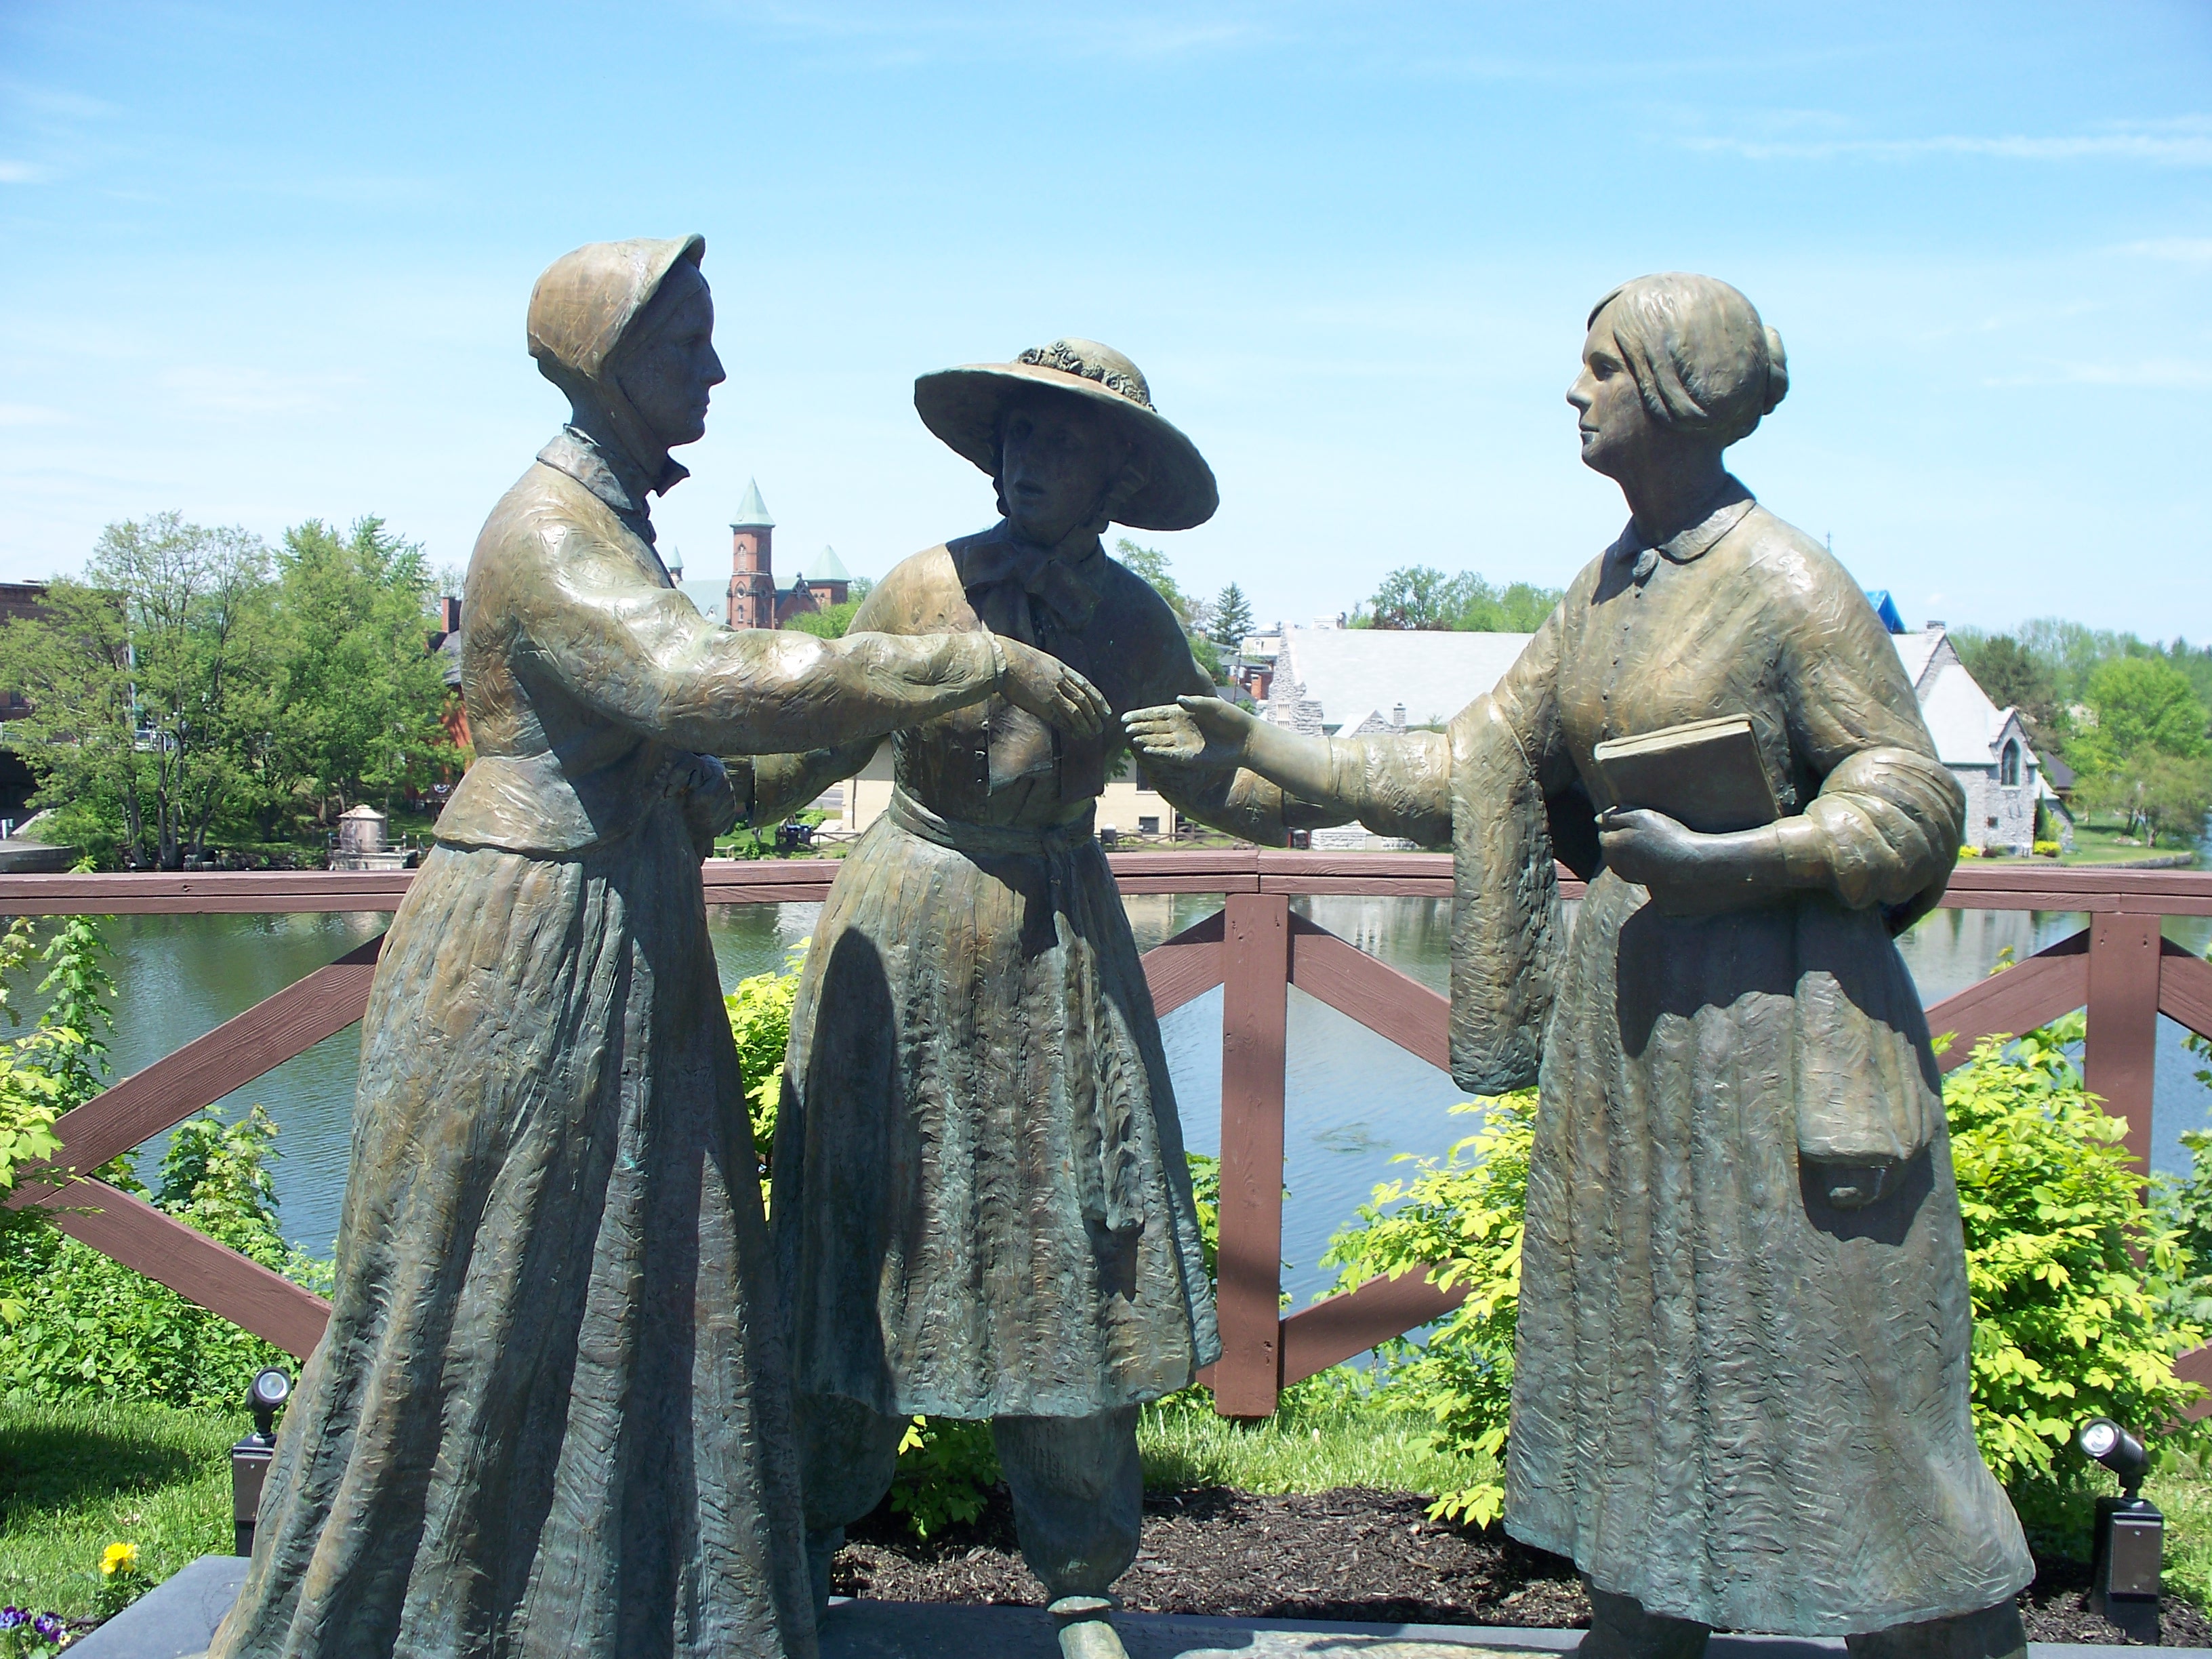 The 1848 Women's Rights Convention in Seneca Falls